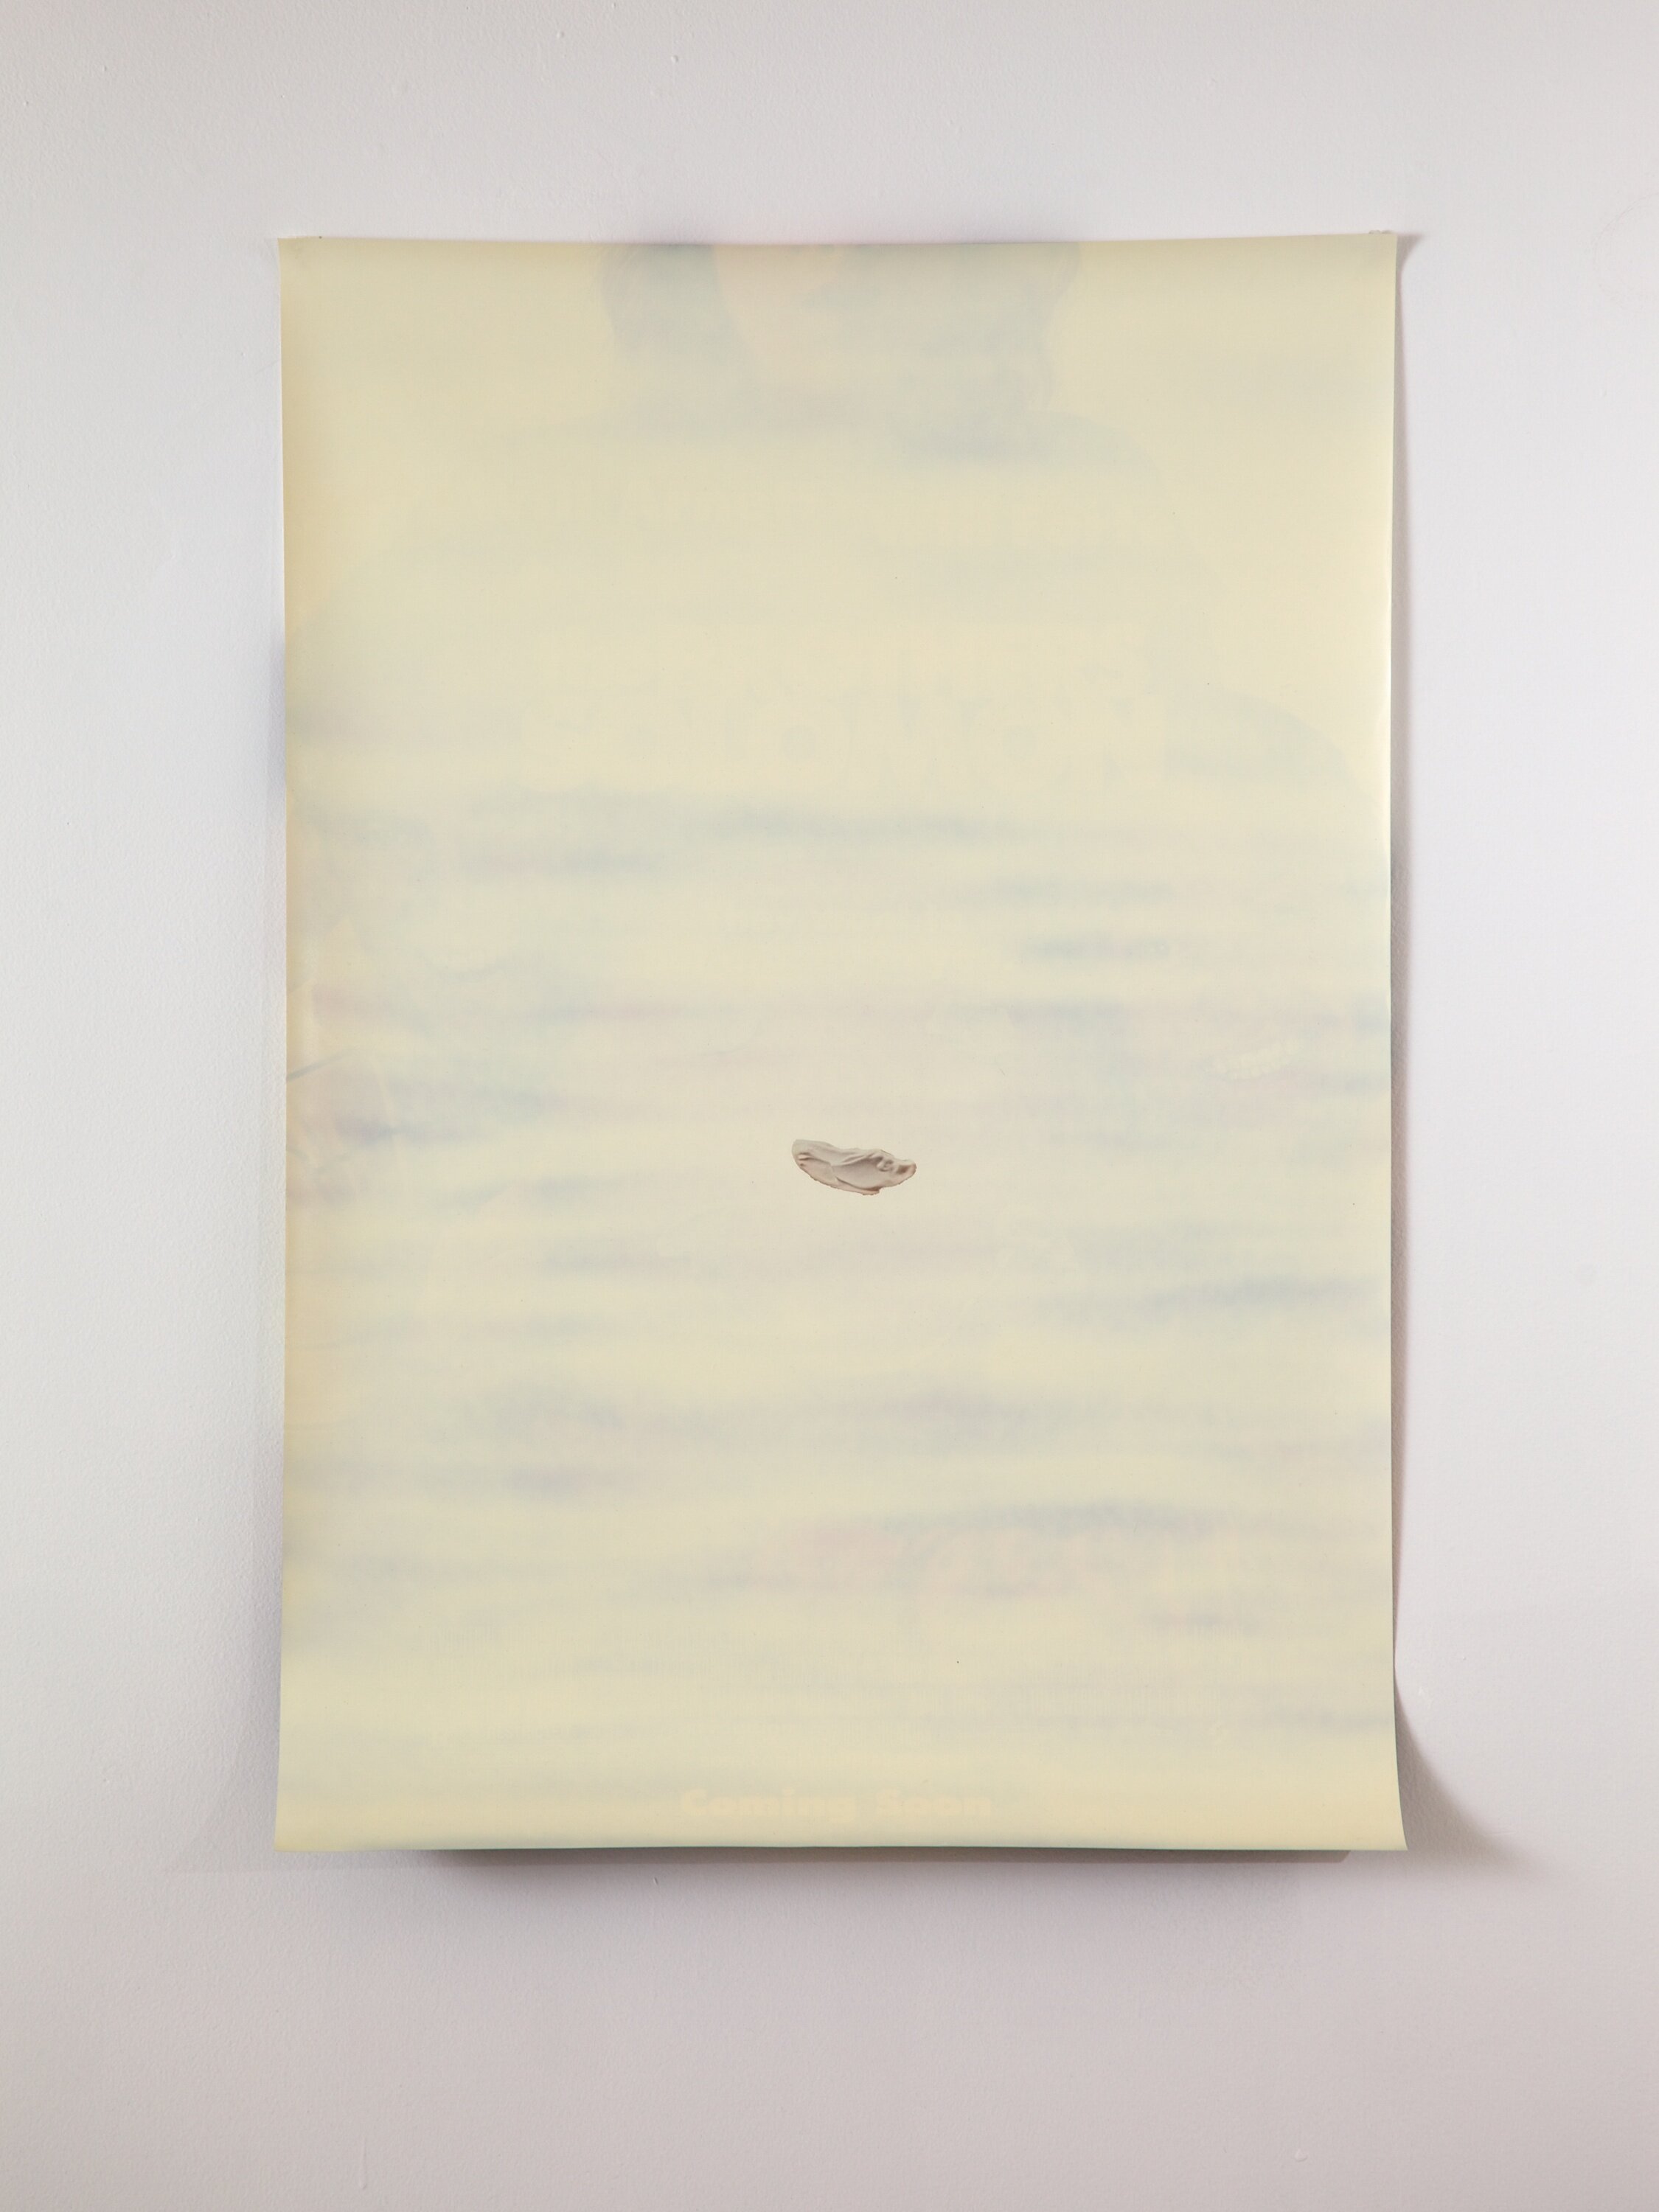  Bobbi Woods, This is gonna be great, 2013, enamel on poster, 40 x 27 inches 